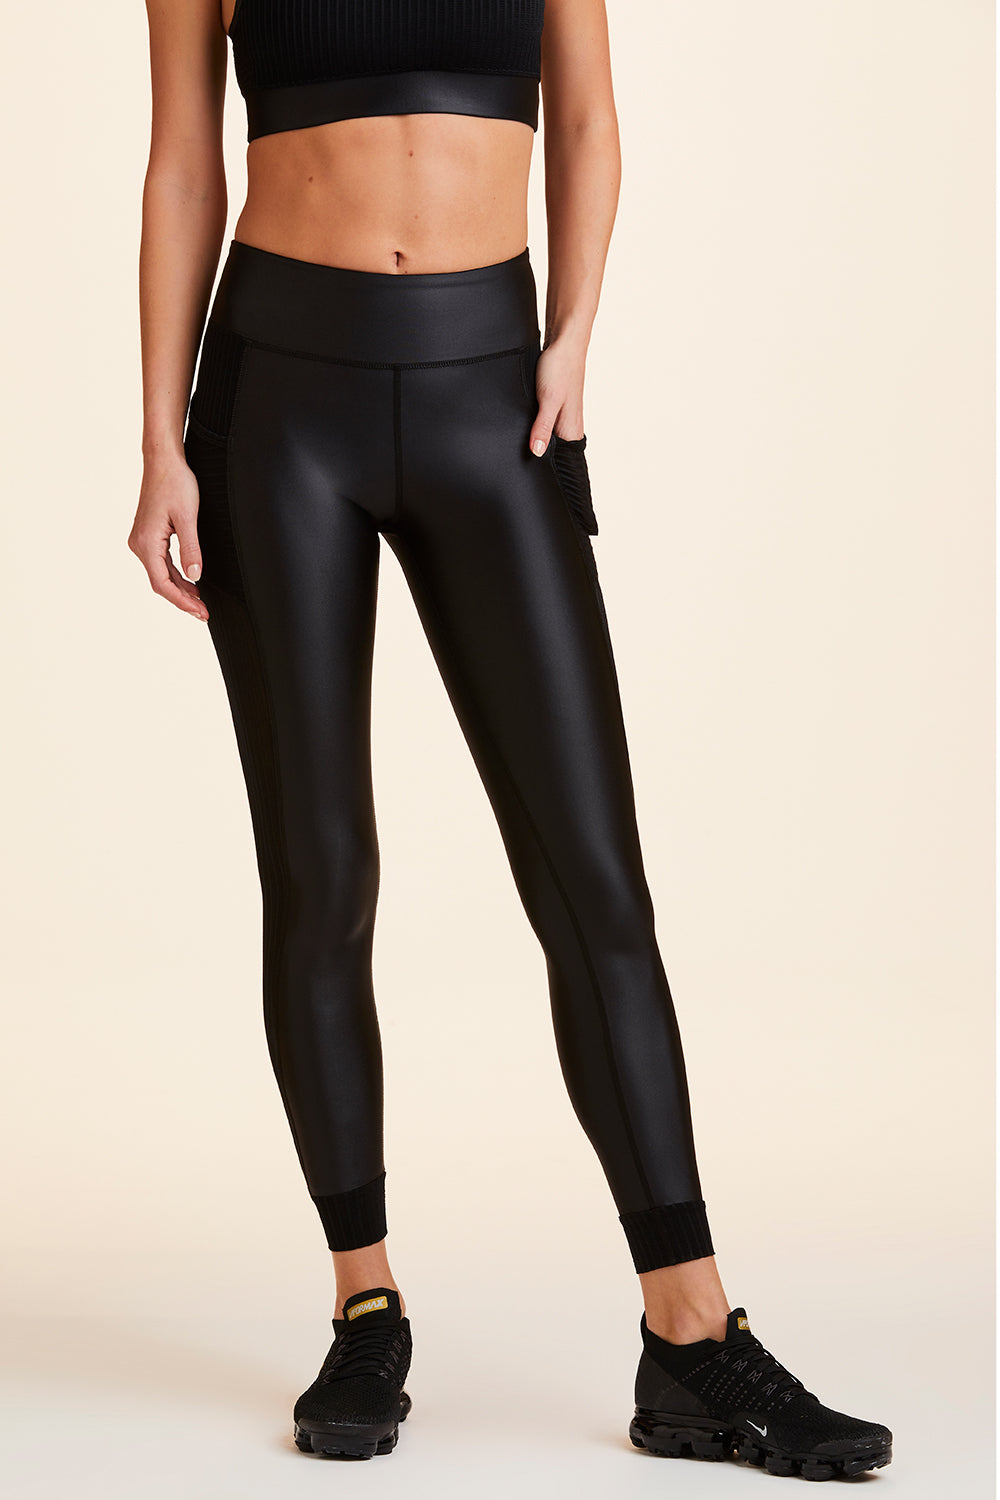 Front view of Alala Women's Luxury Athleisure shiny black tight with sheer ribbed detail